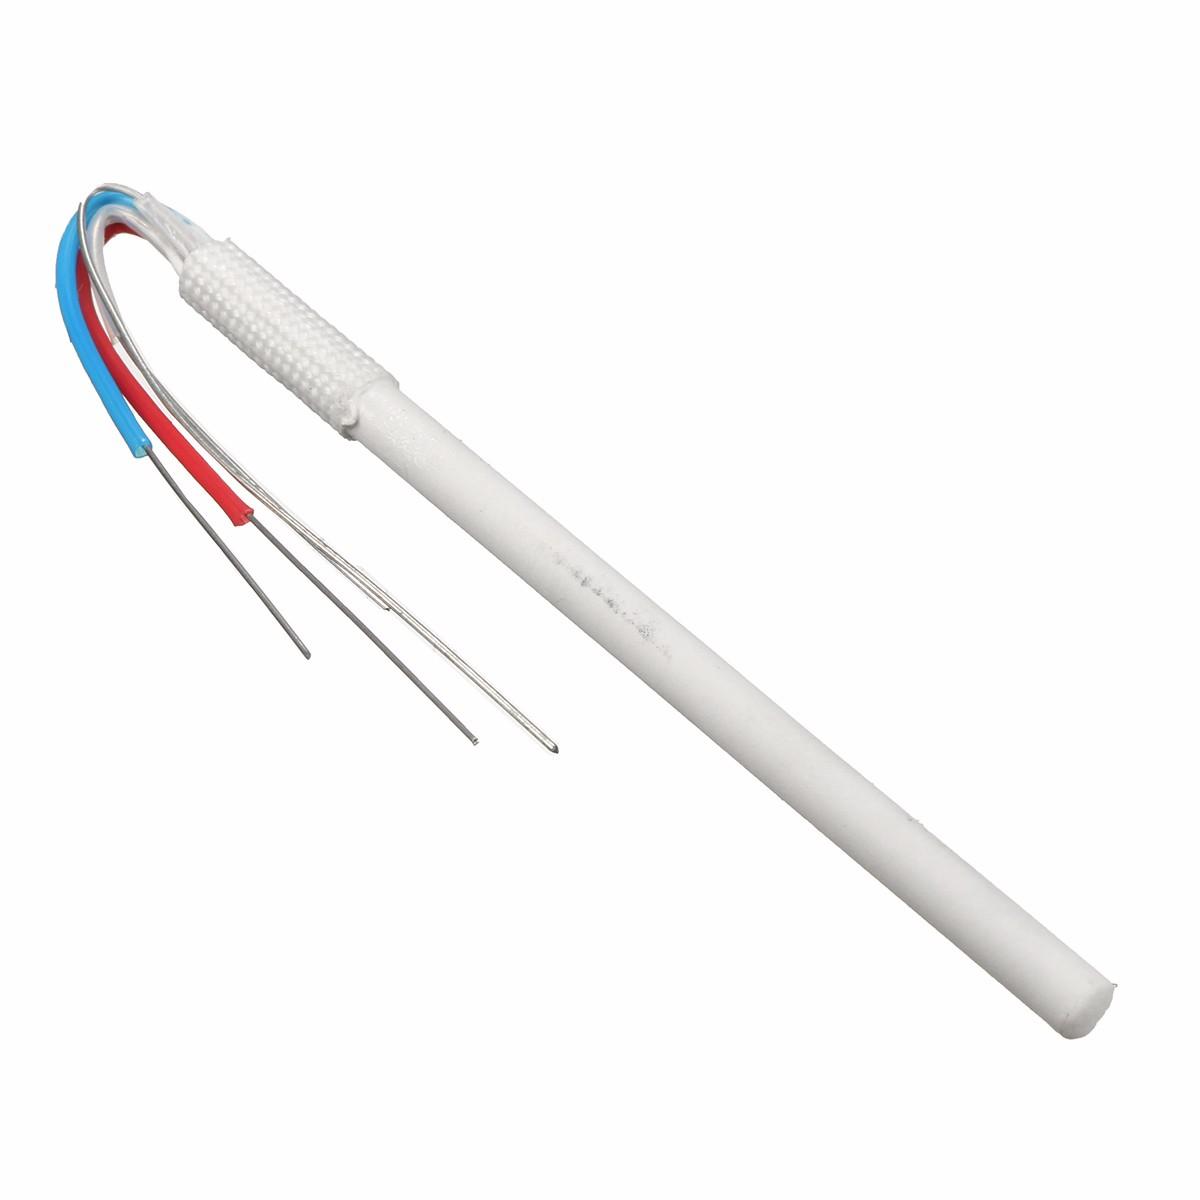 1Pc 24V DC 50W 4 Pin Ceramic Core Heating Element for Soldering Iron US1.99